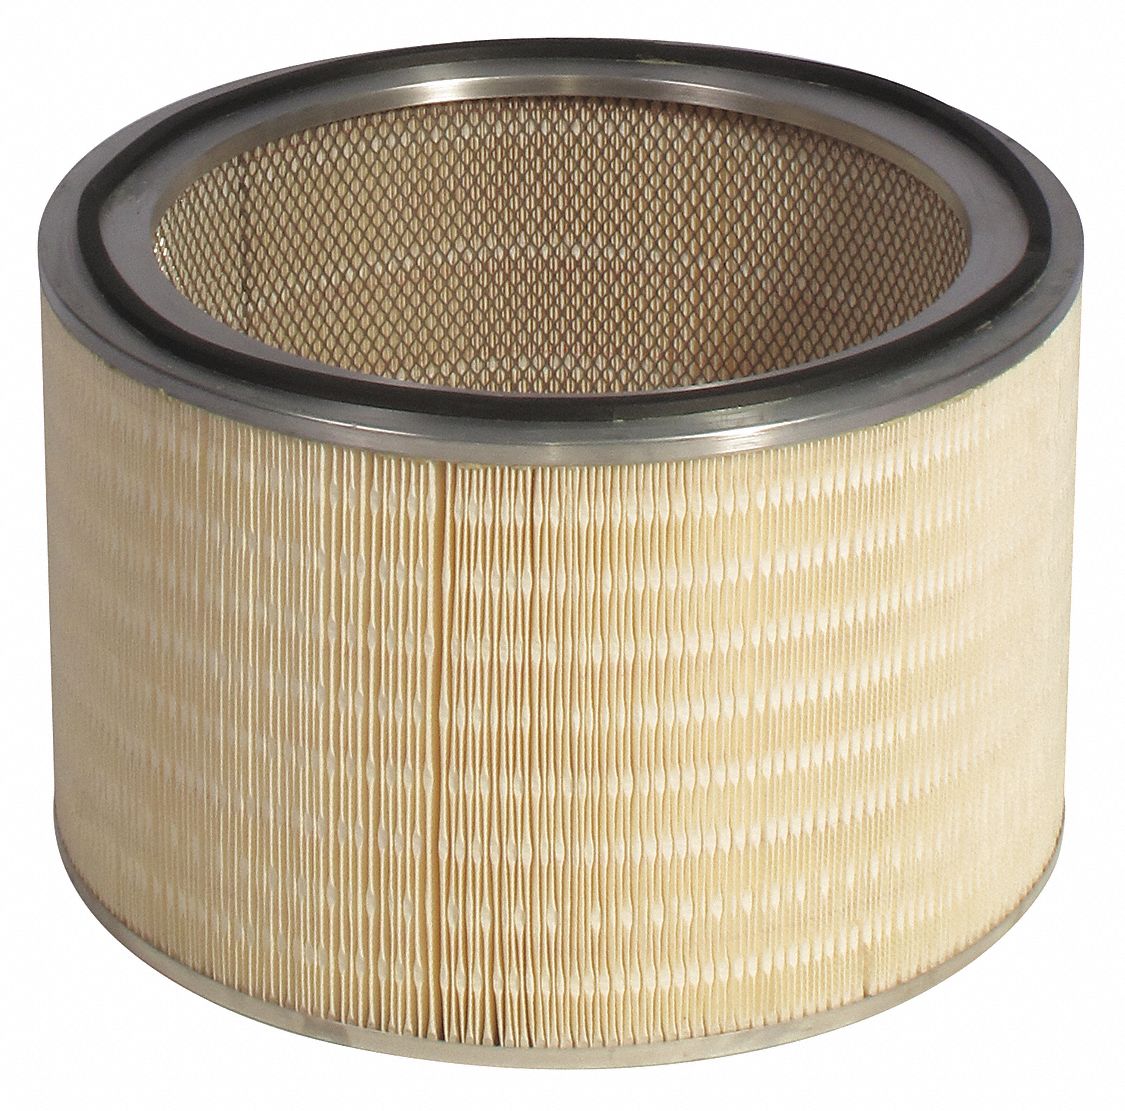 Cartridge Filter; For Use With Mfr. No. S210, S230